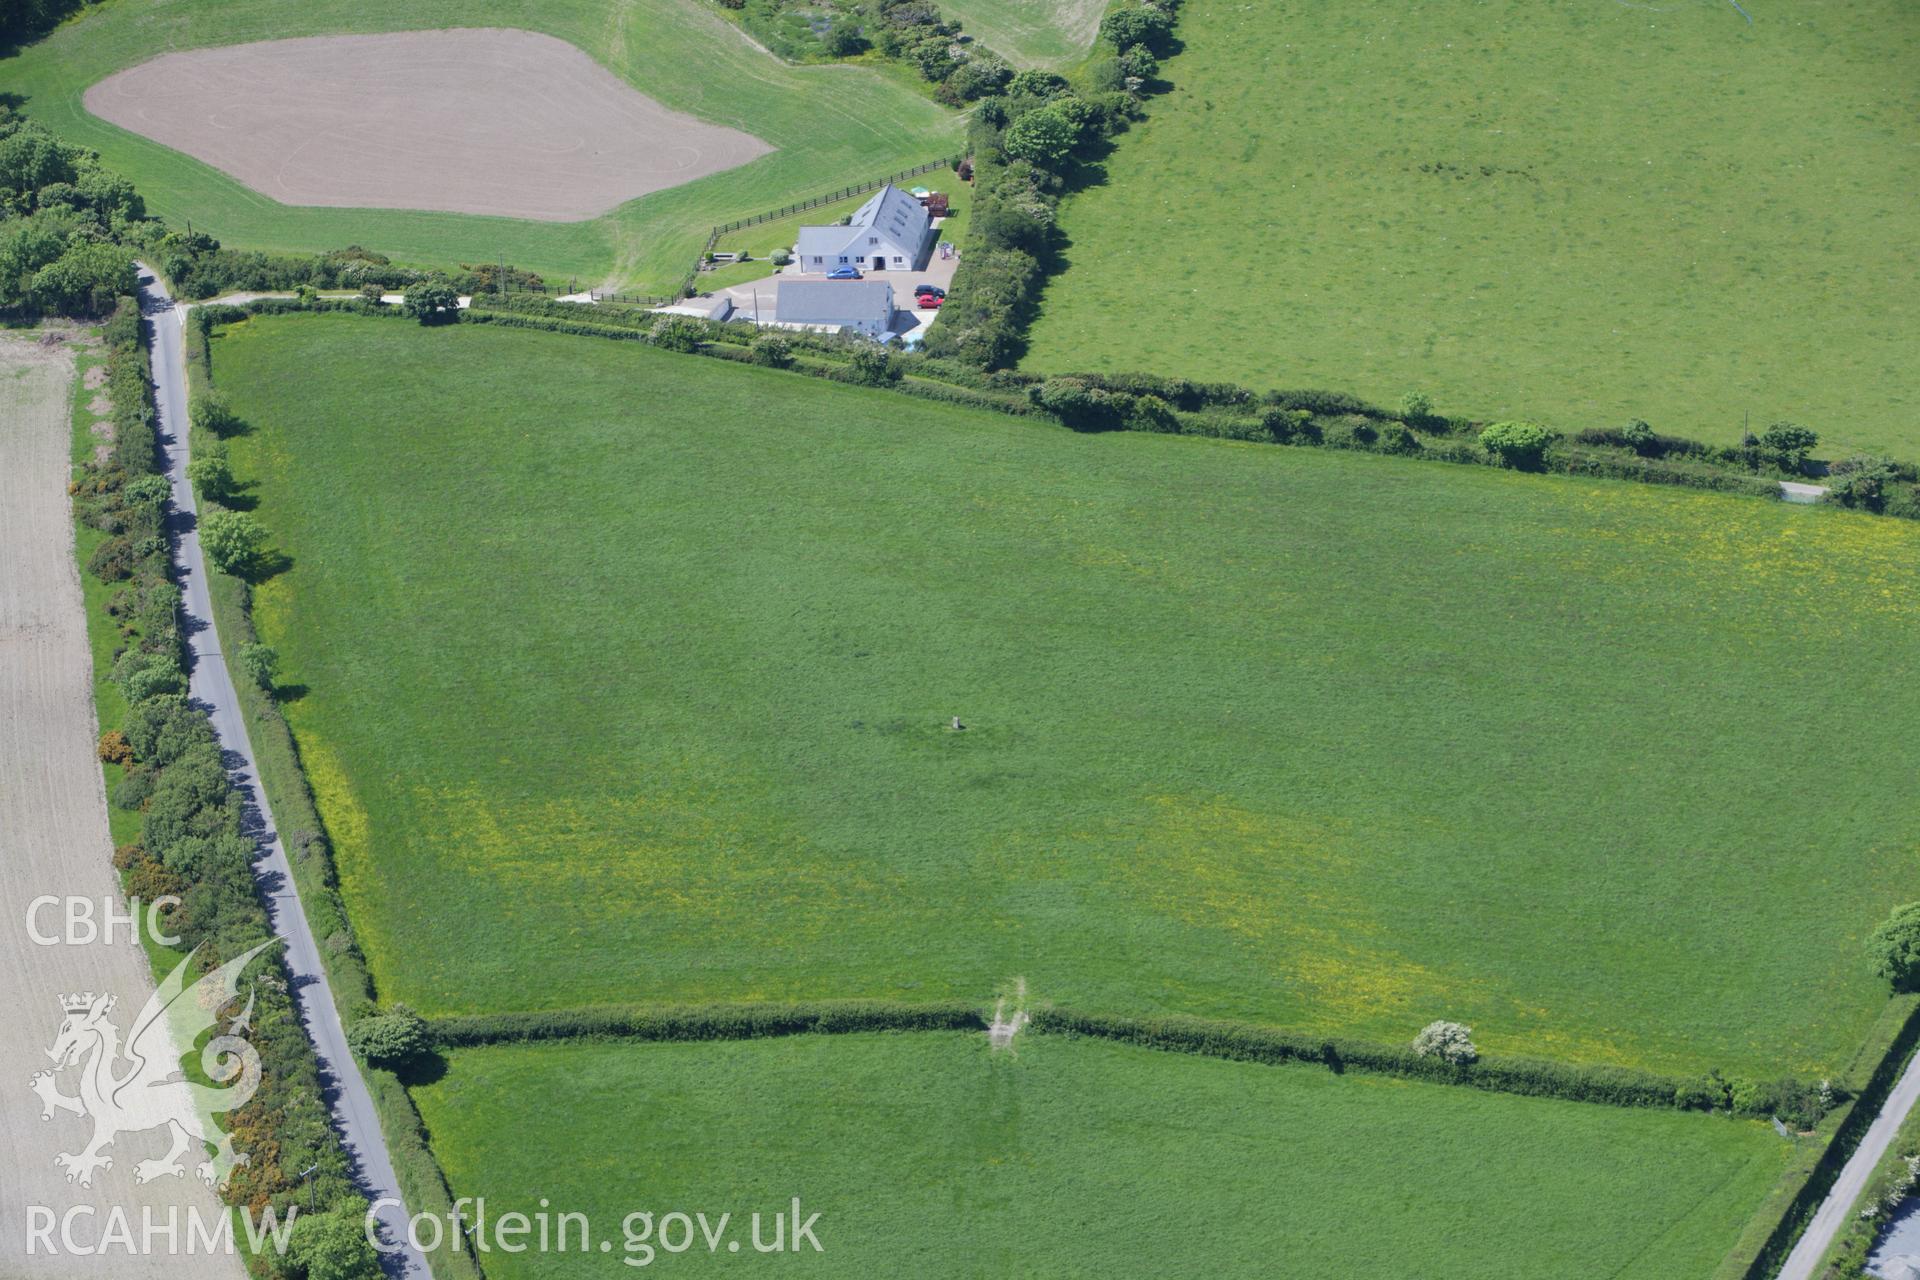 RCAHMW colour oblique aerial photograph of Corbalengi Stone. Taken on 01 June 2009 by Toby Driver